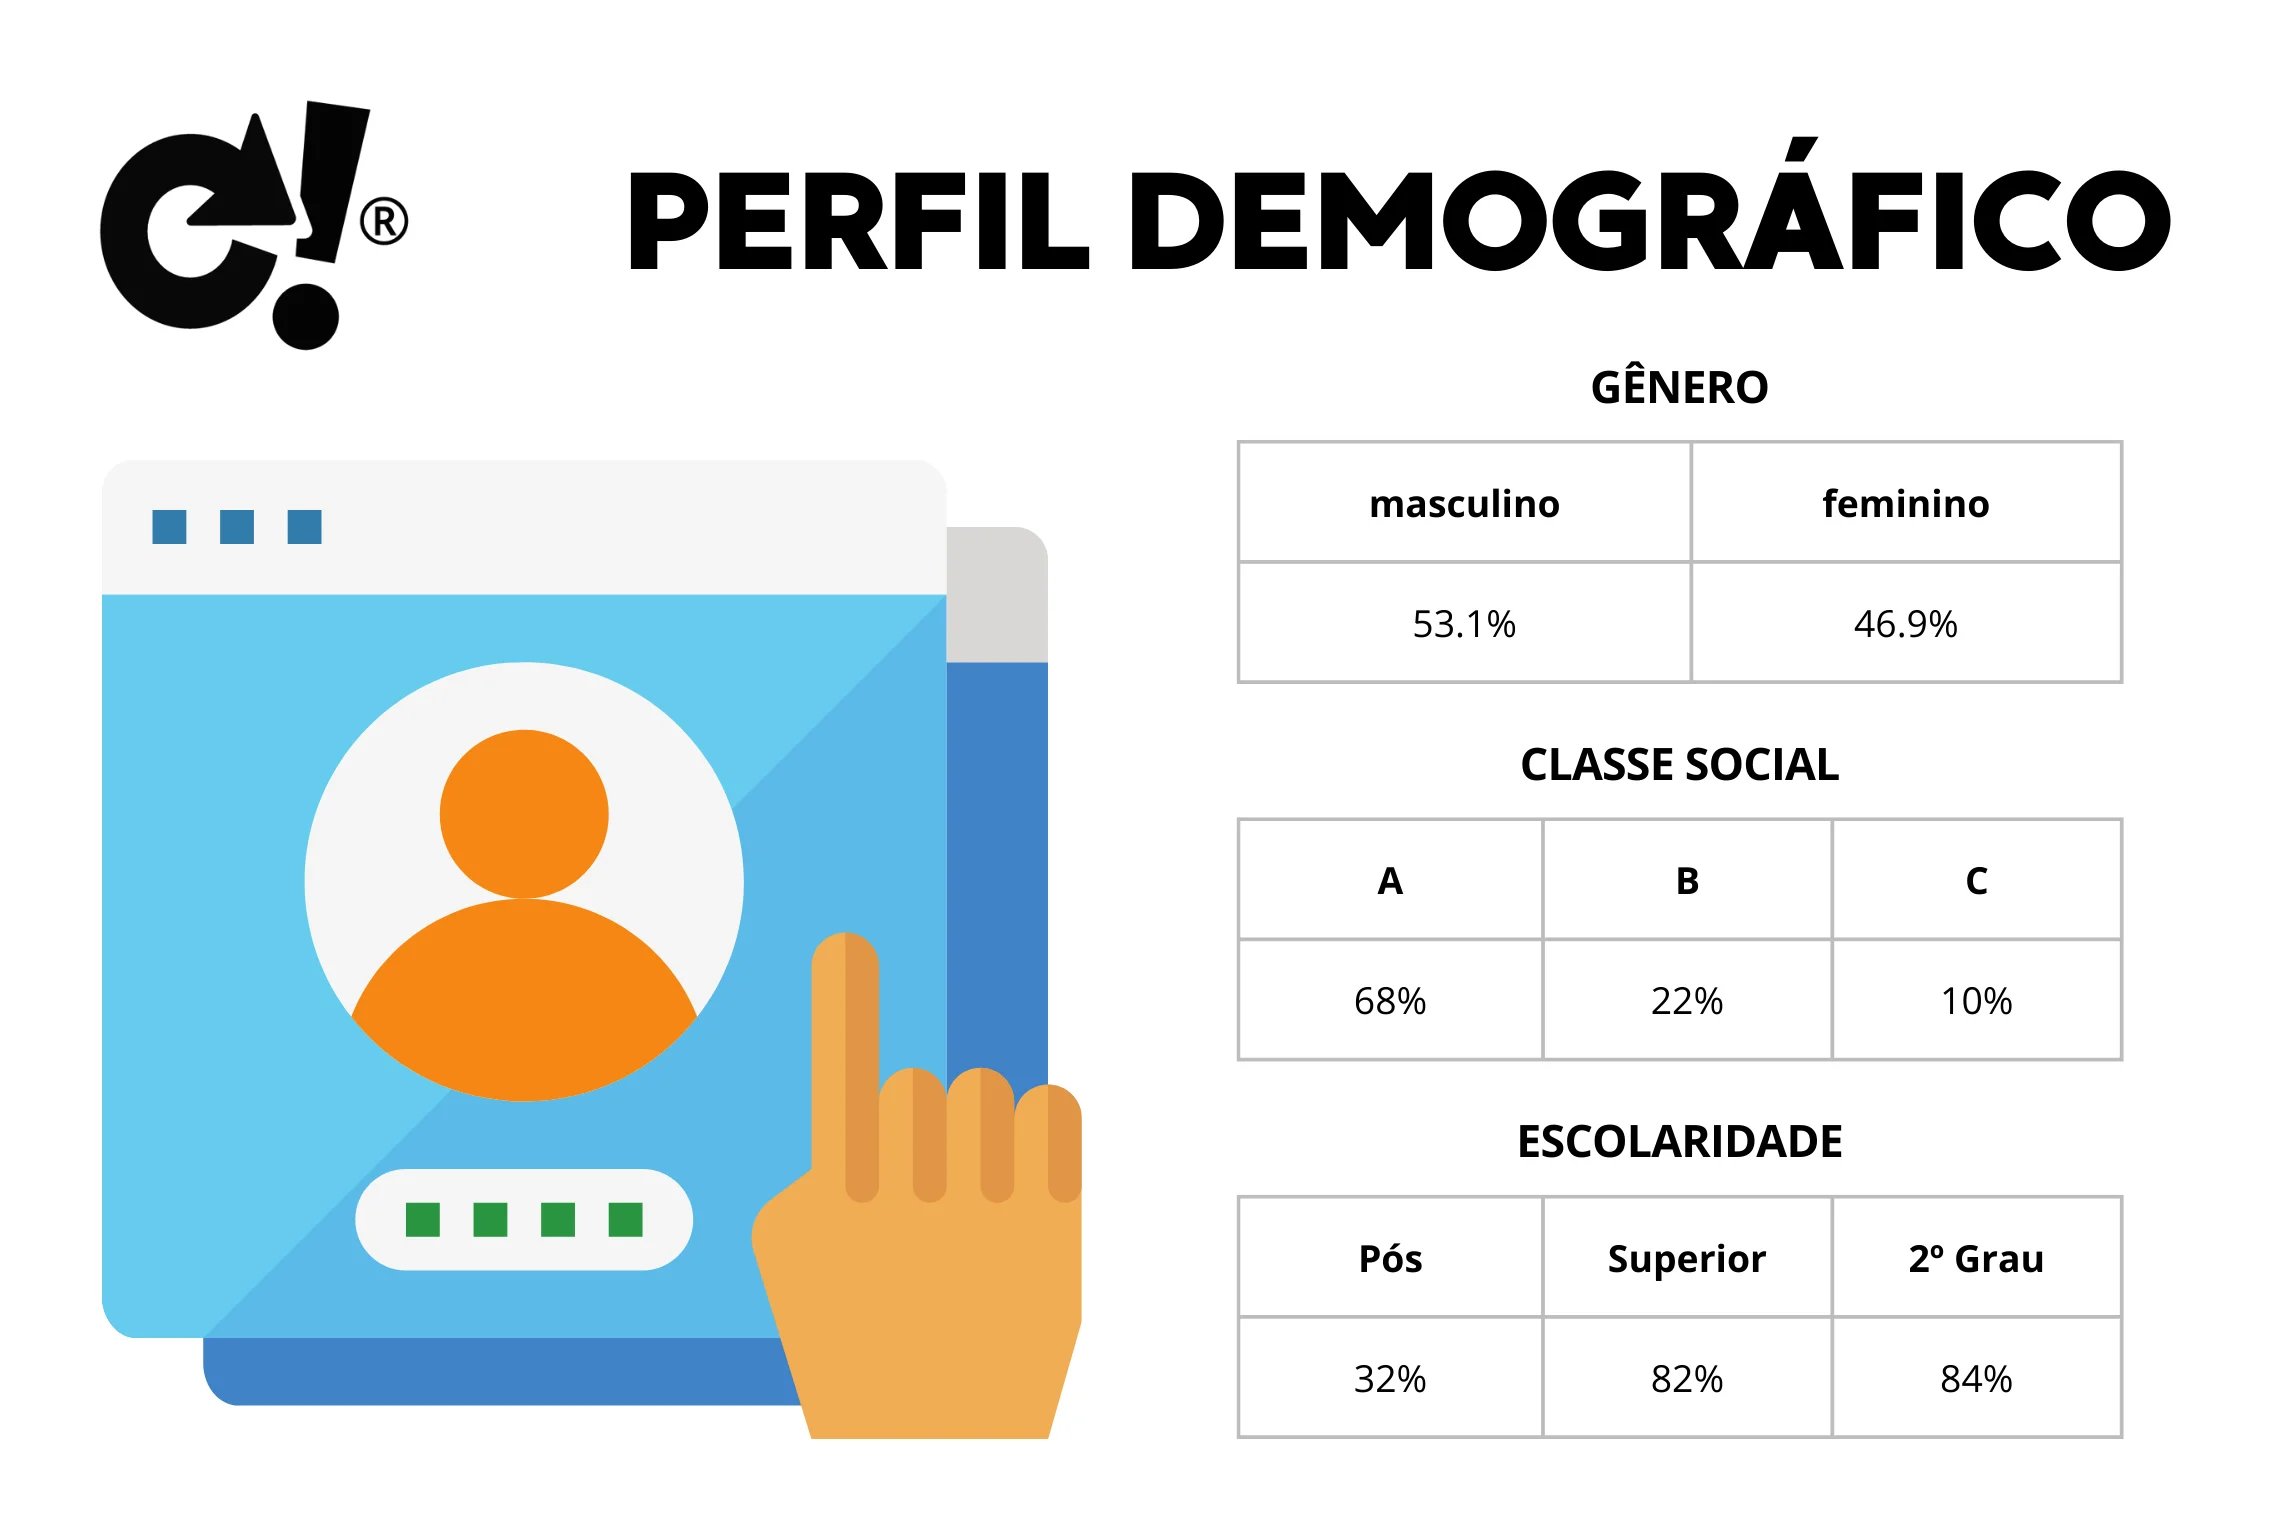 Graphic showing demographic profile with gender distribution, social class breakdown, and education levels in Portuguese.